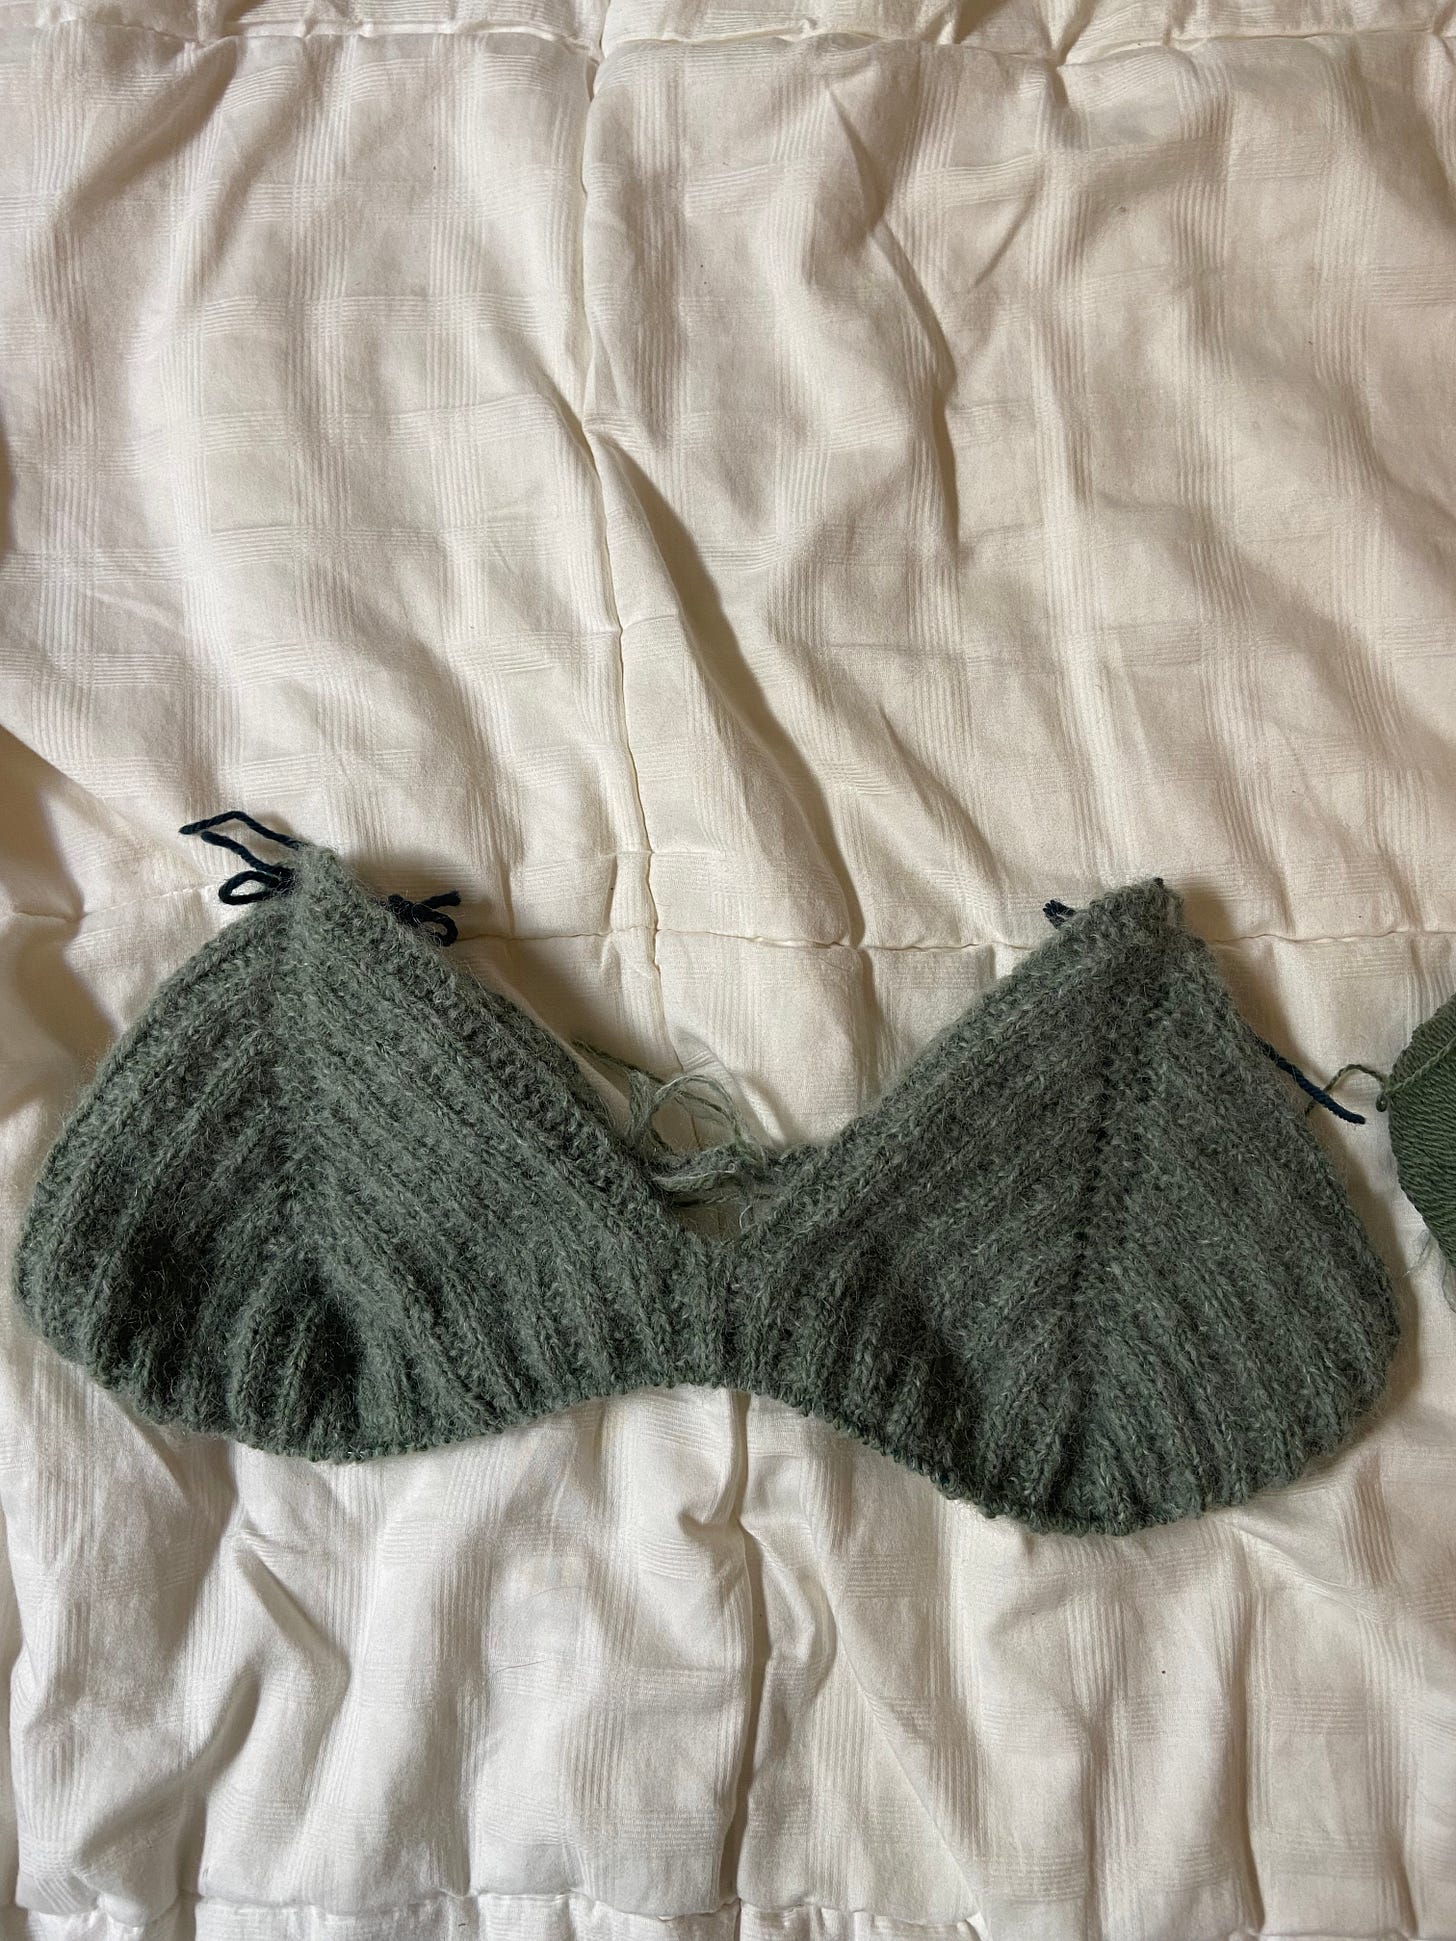 a fuzzy green knit tank. only the triangles at the top have been completed.